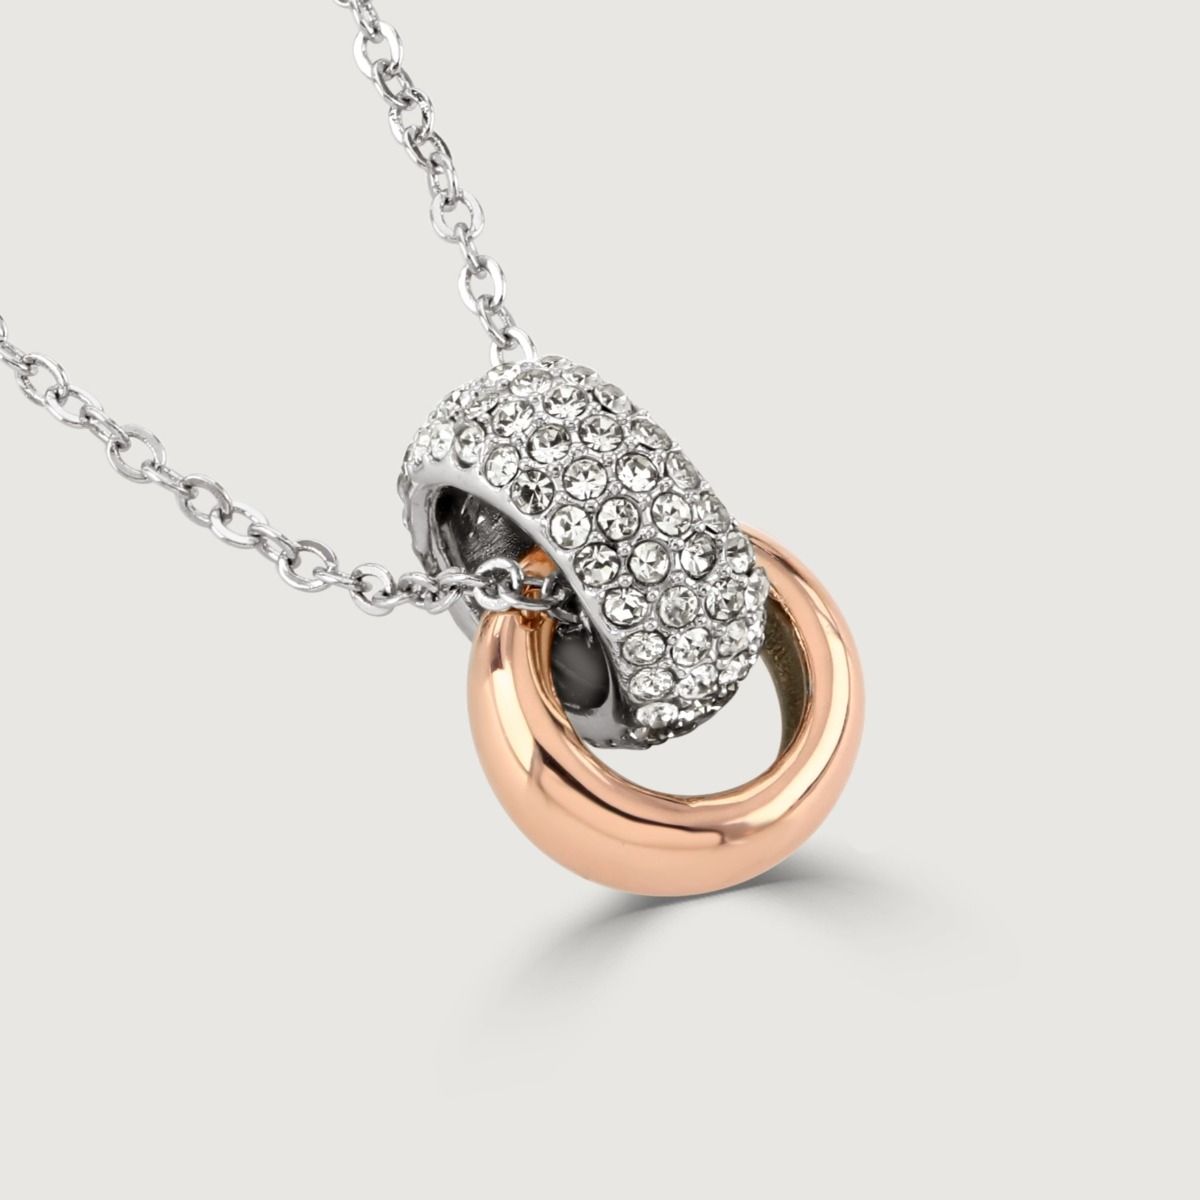 The polished crystal two-tone duo pendant is a bestseller. The pairing of the two-tone plating and crystals, allows this to be an everyday favourite.